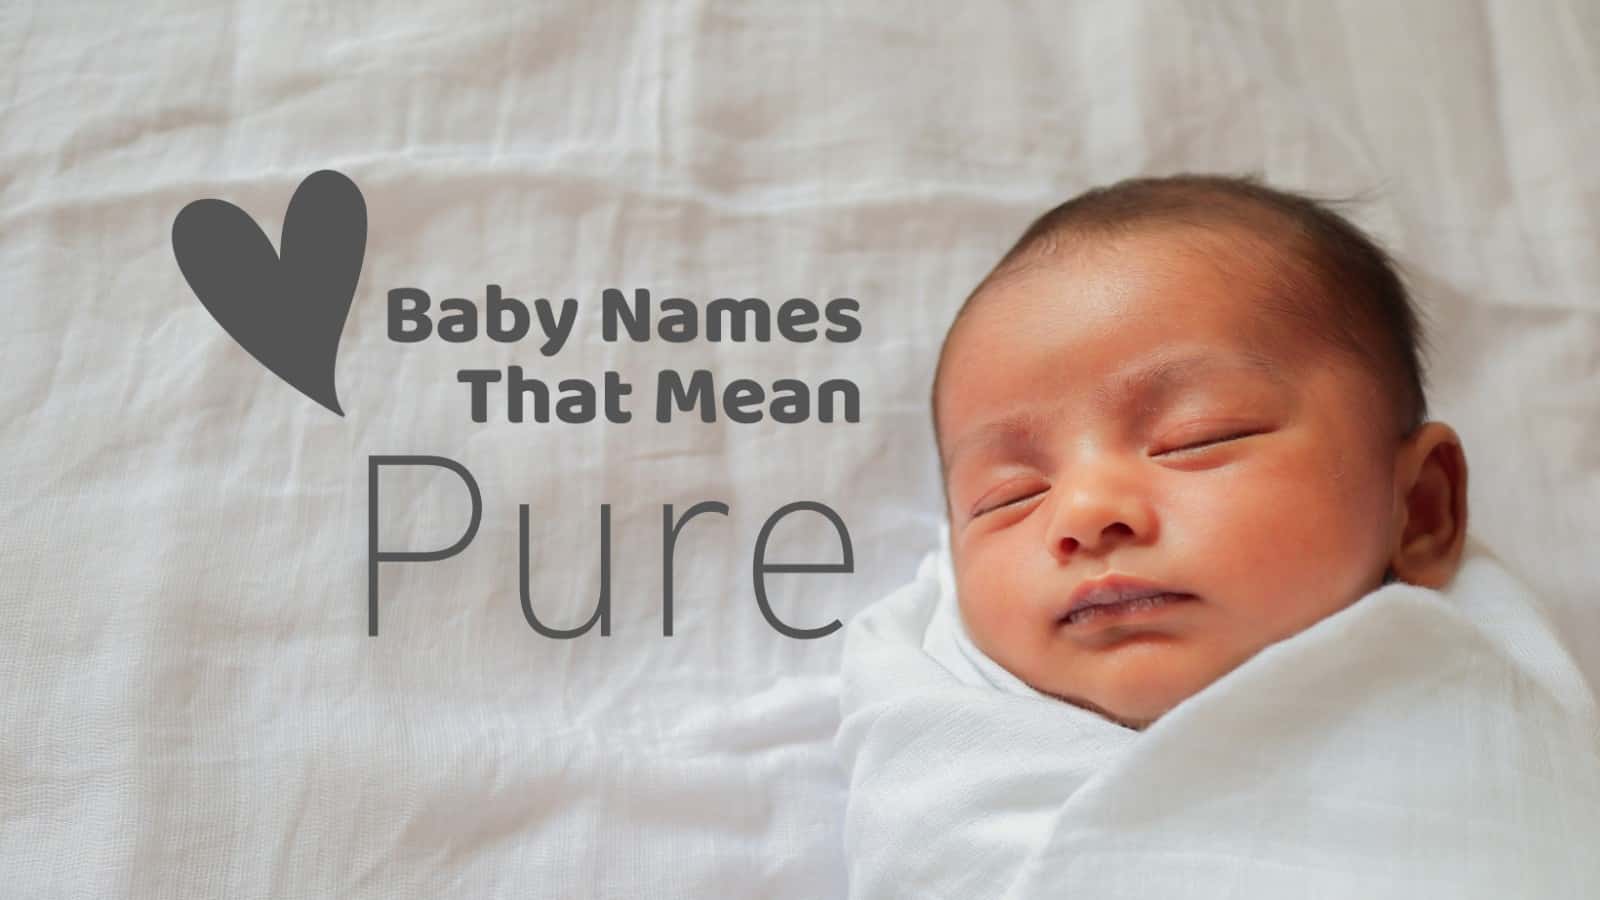 Baby Names that mean pure